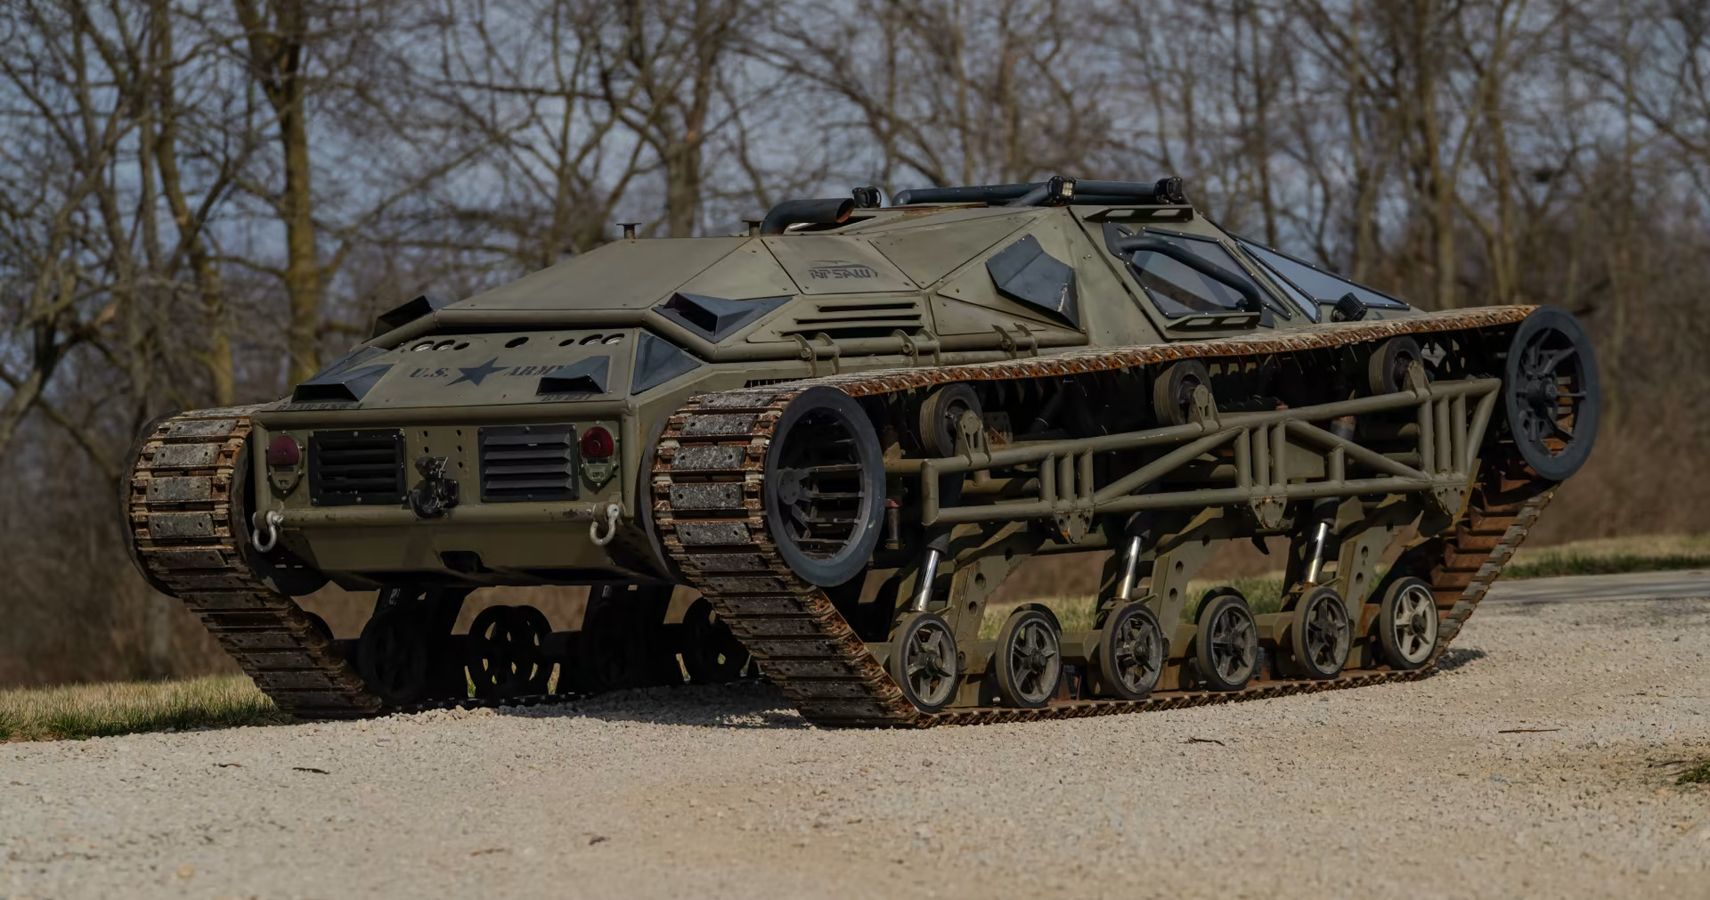 The Ripsaw EV2 light-weight “luxury tank” with top speed of 60 mph